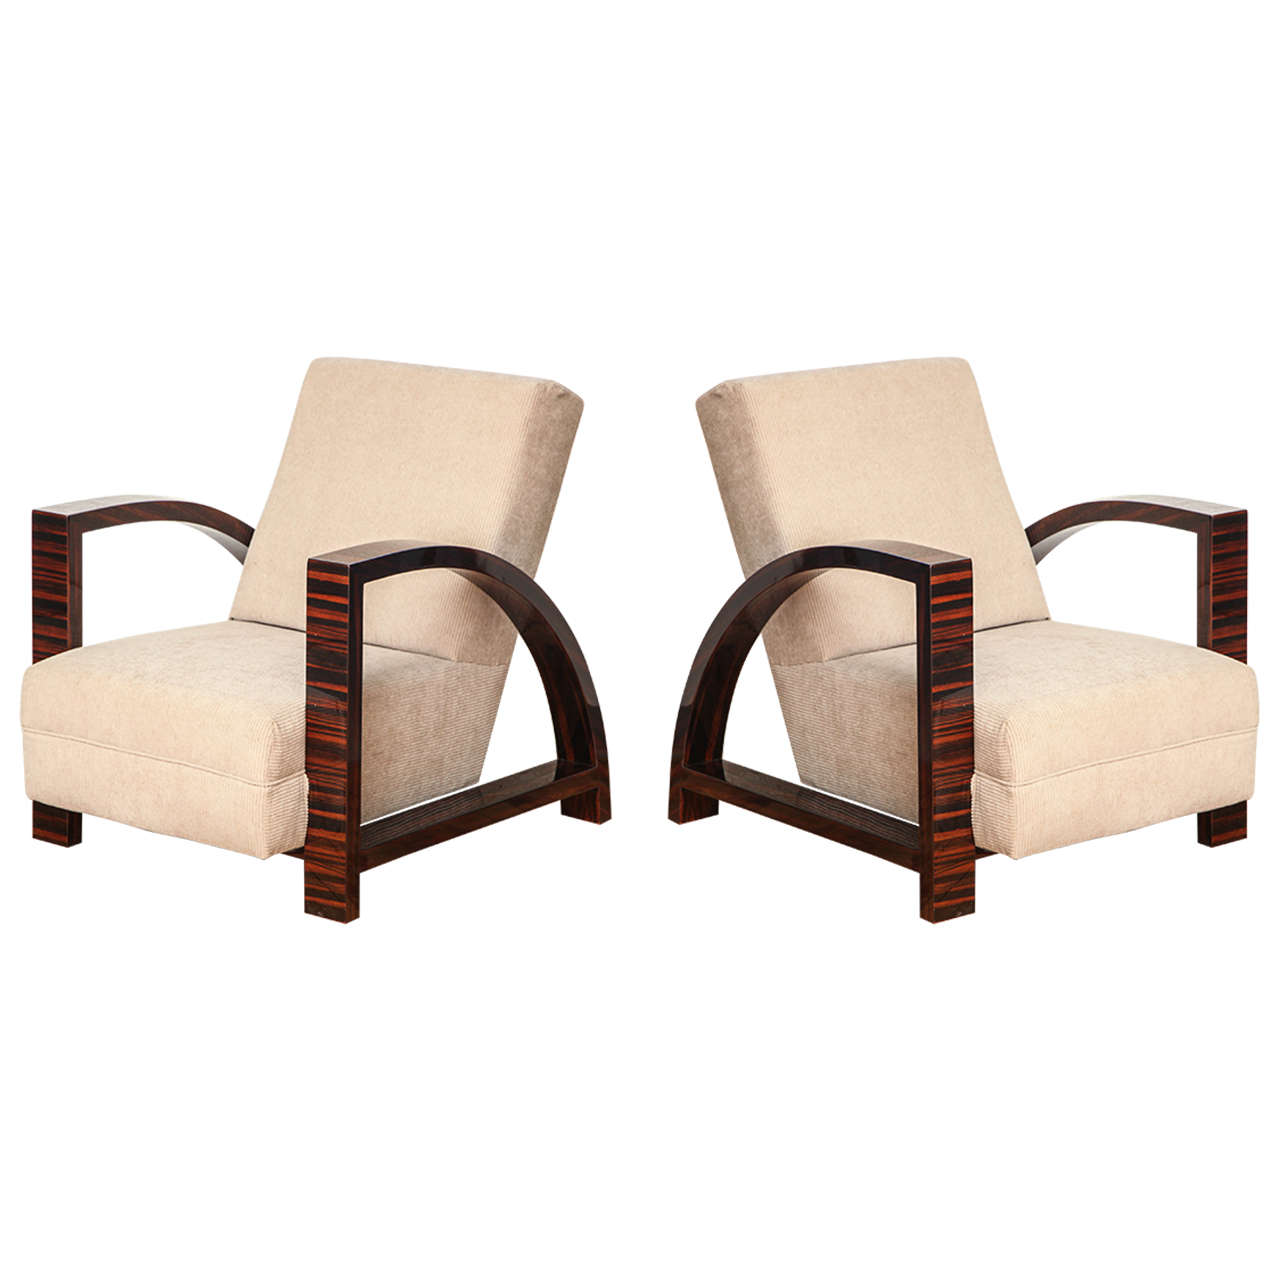 Pair of Chic Art Deco Armchairs